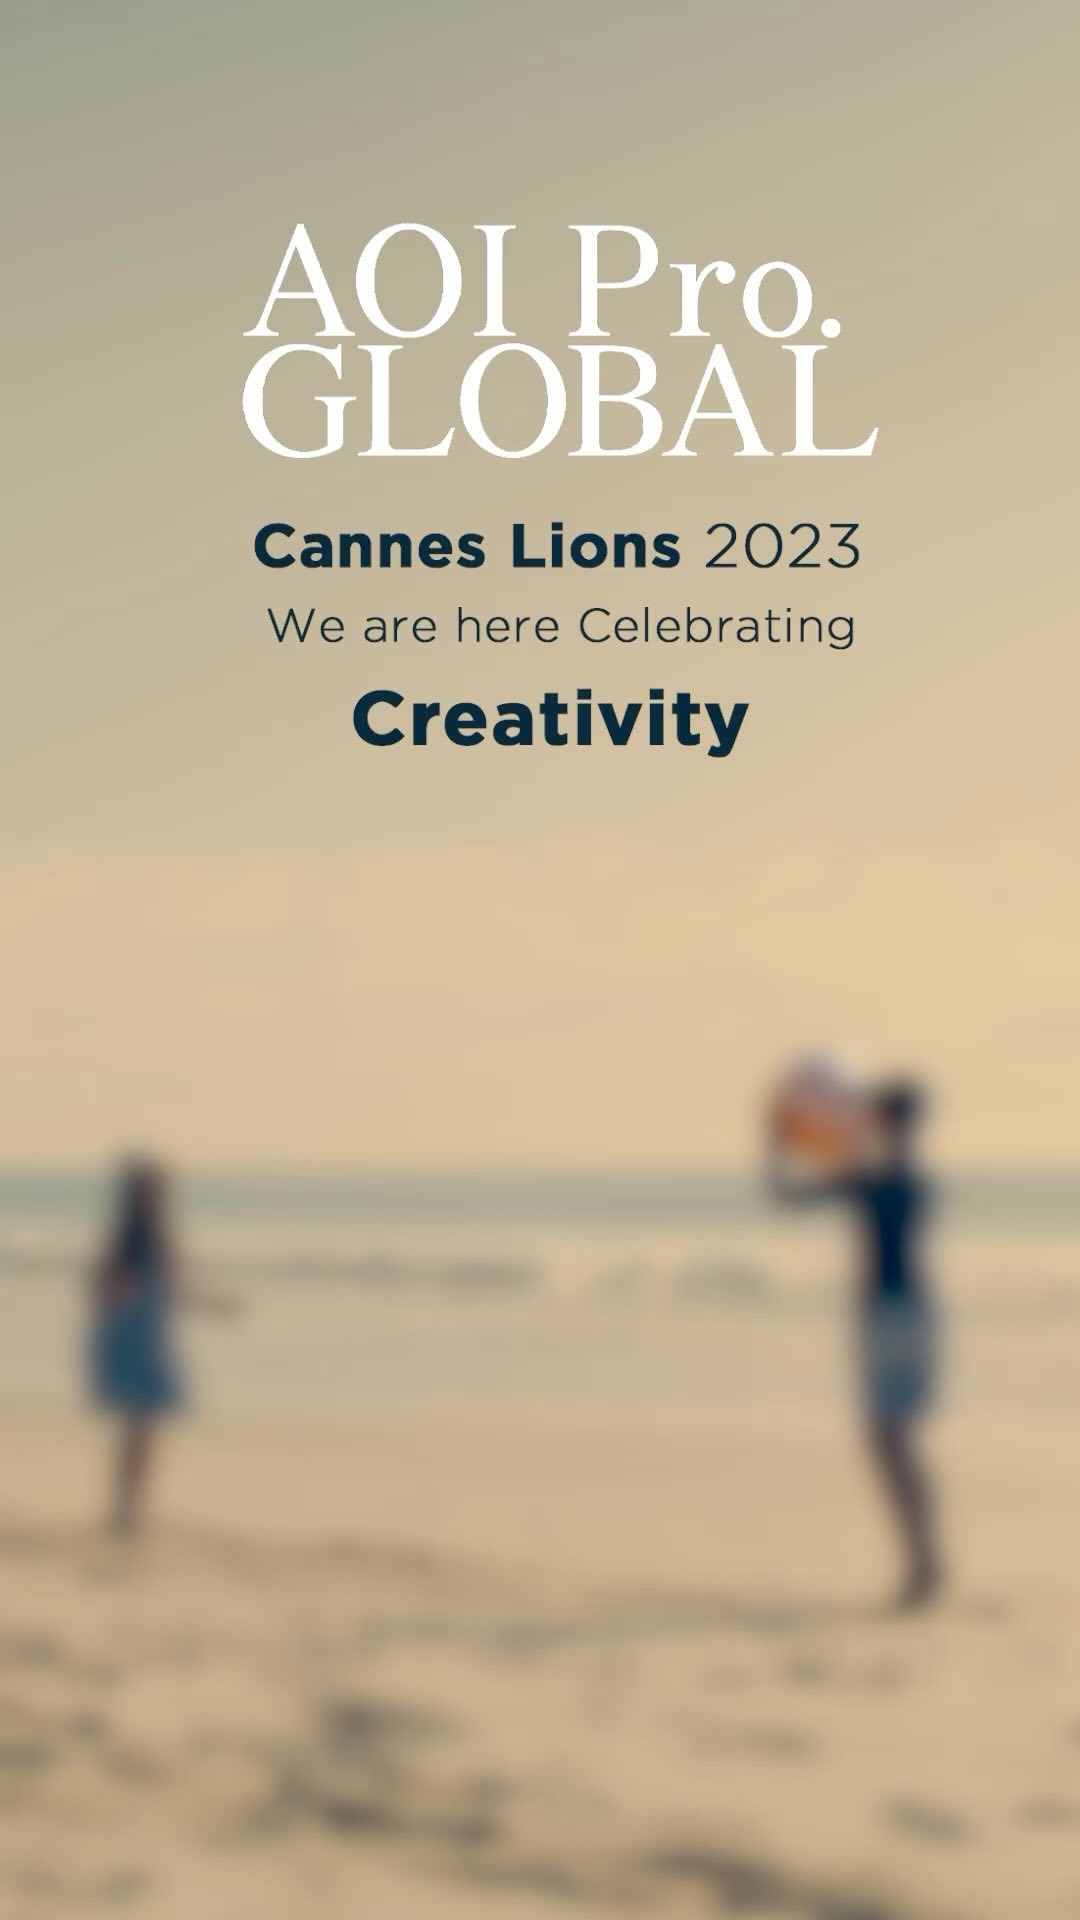 Celebrate creativity at Cannes Lions 2023 with AOI Pro.  

Our team is here from June 19th to 23rd. Let’s connect, share ideas, and fuel the spark of creativity together

And don’t miss out on our ‘A Summer Night in Tokyo’ beach party tomorrow, June 20th!